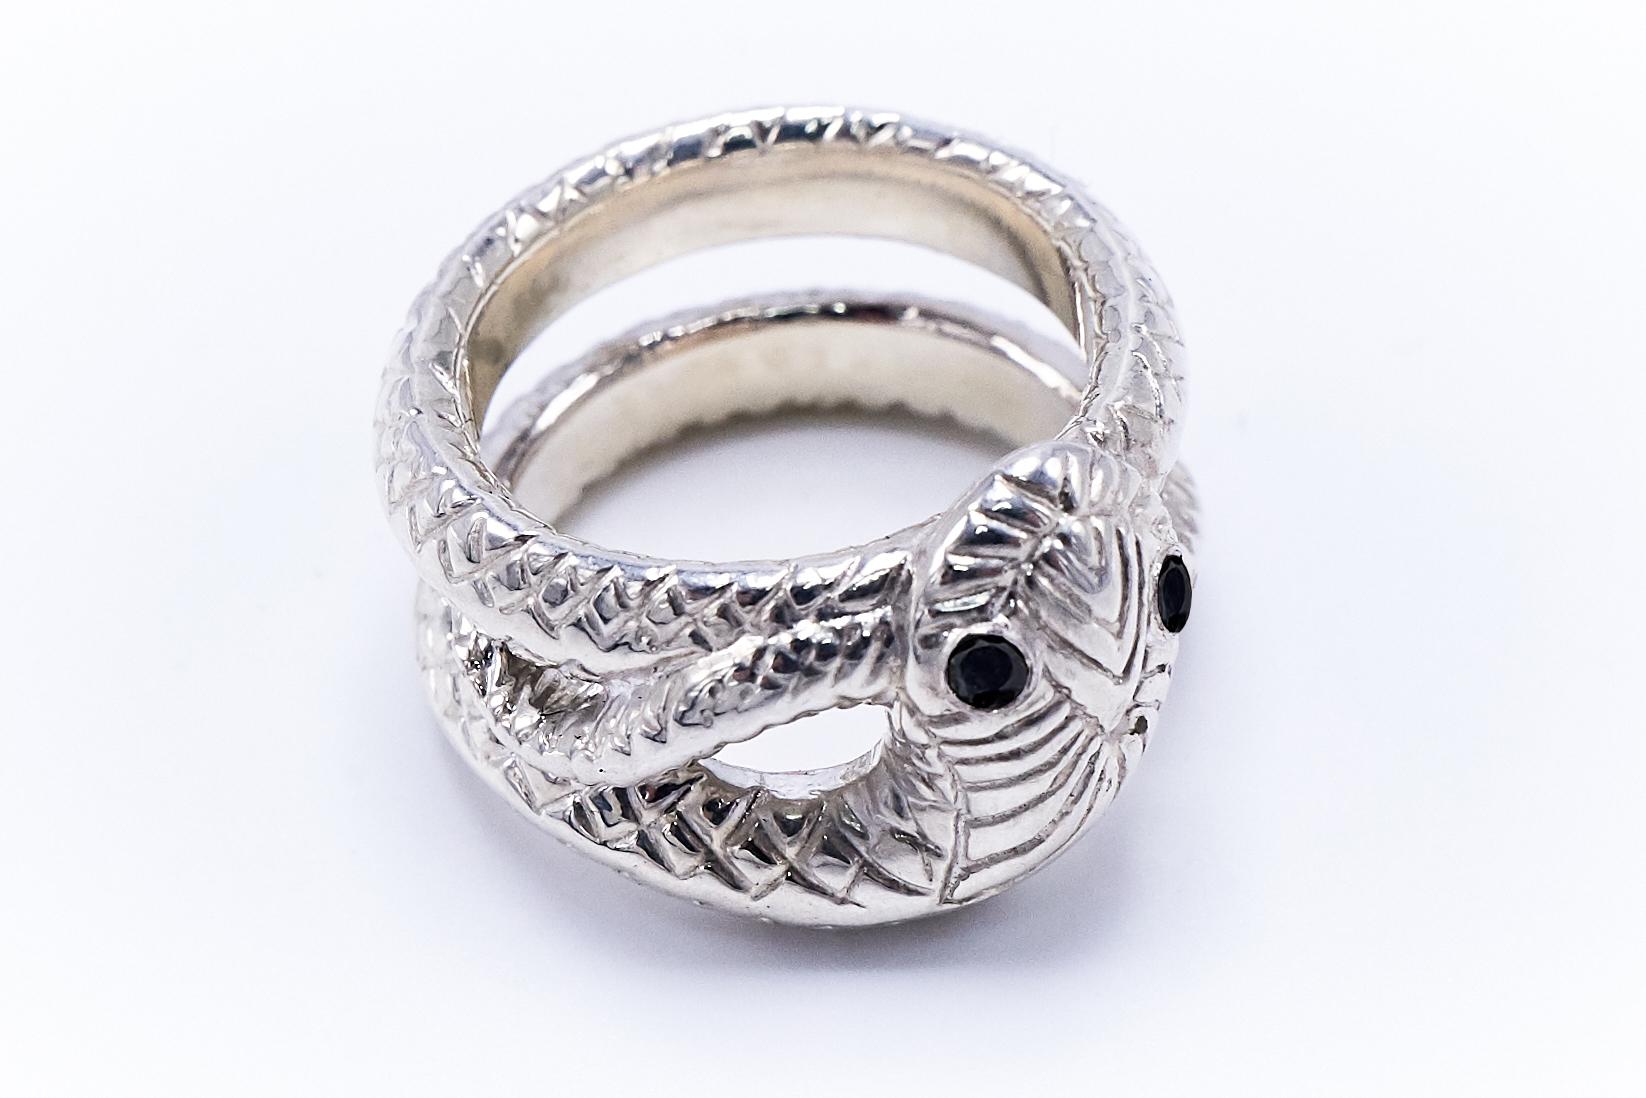 Contemporary Snake Ring Black Diamond Sterling Silver Cocktail Ring J Dauphin For Sale